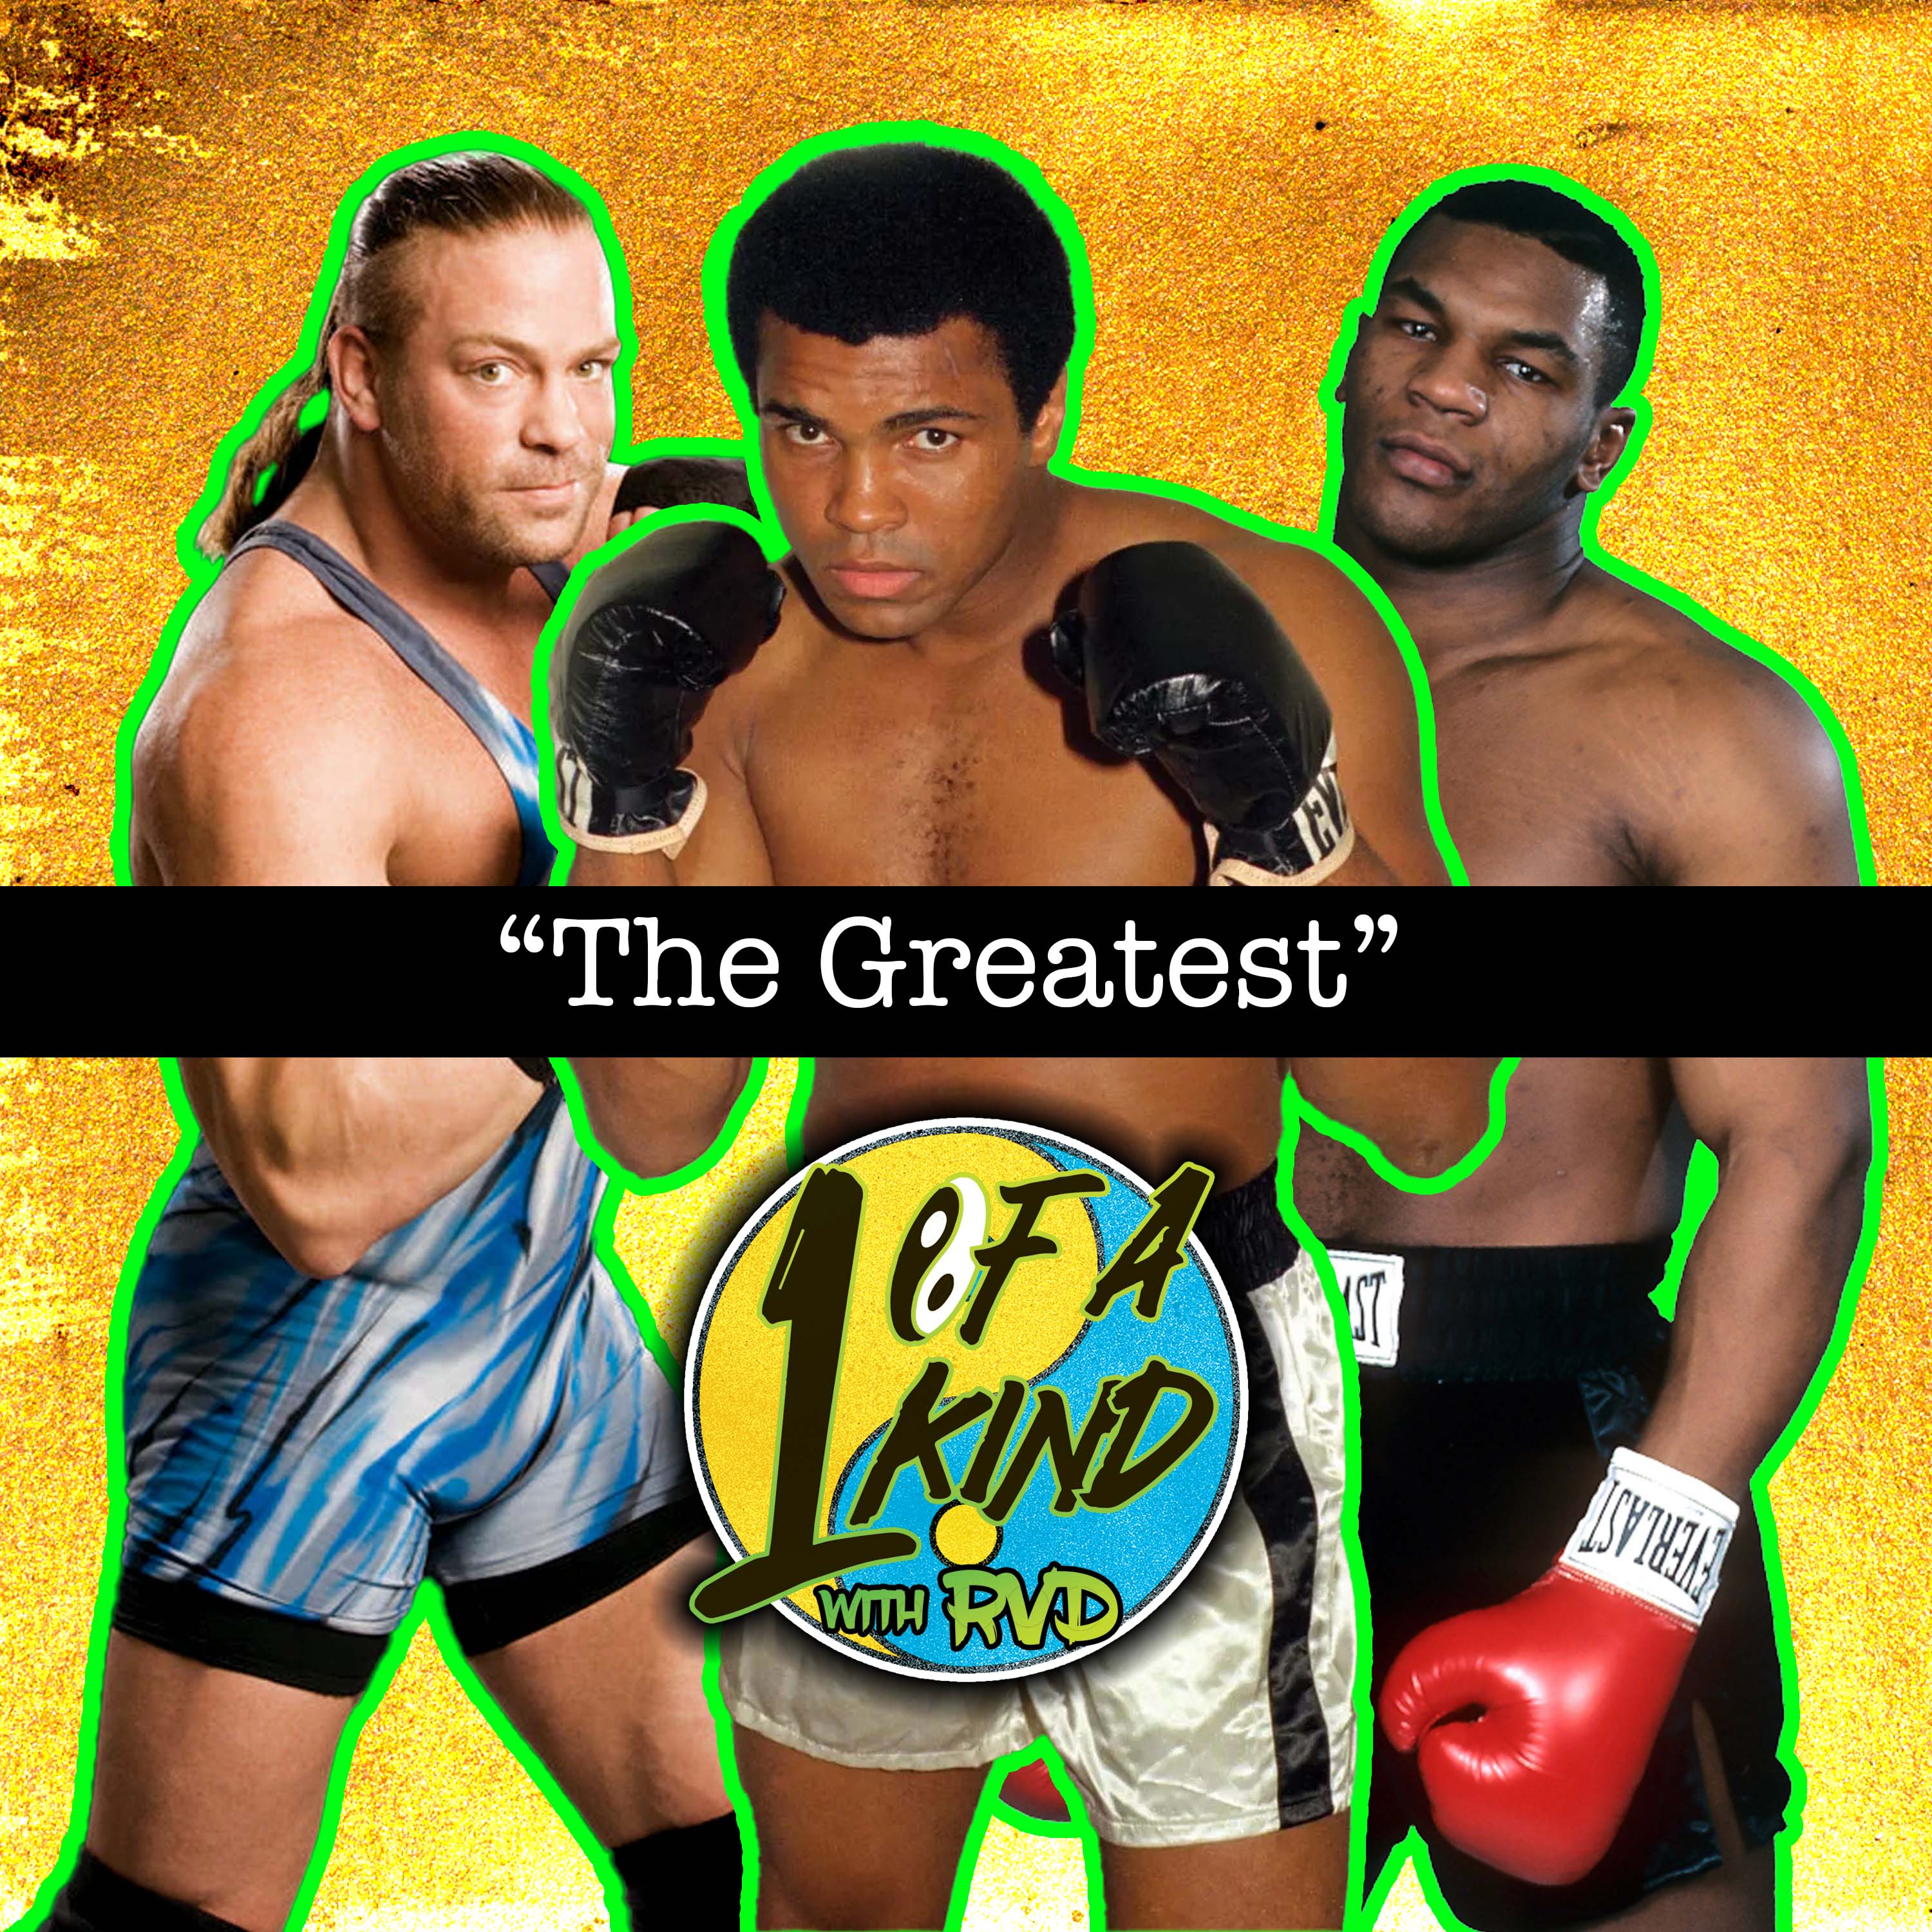 Episode 44: ”The Greatest”